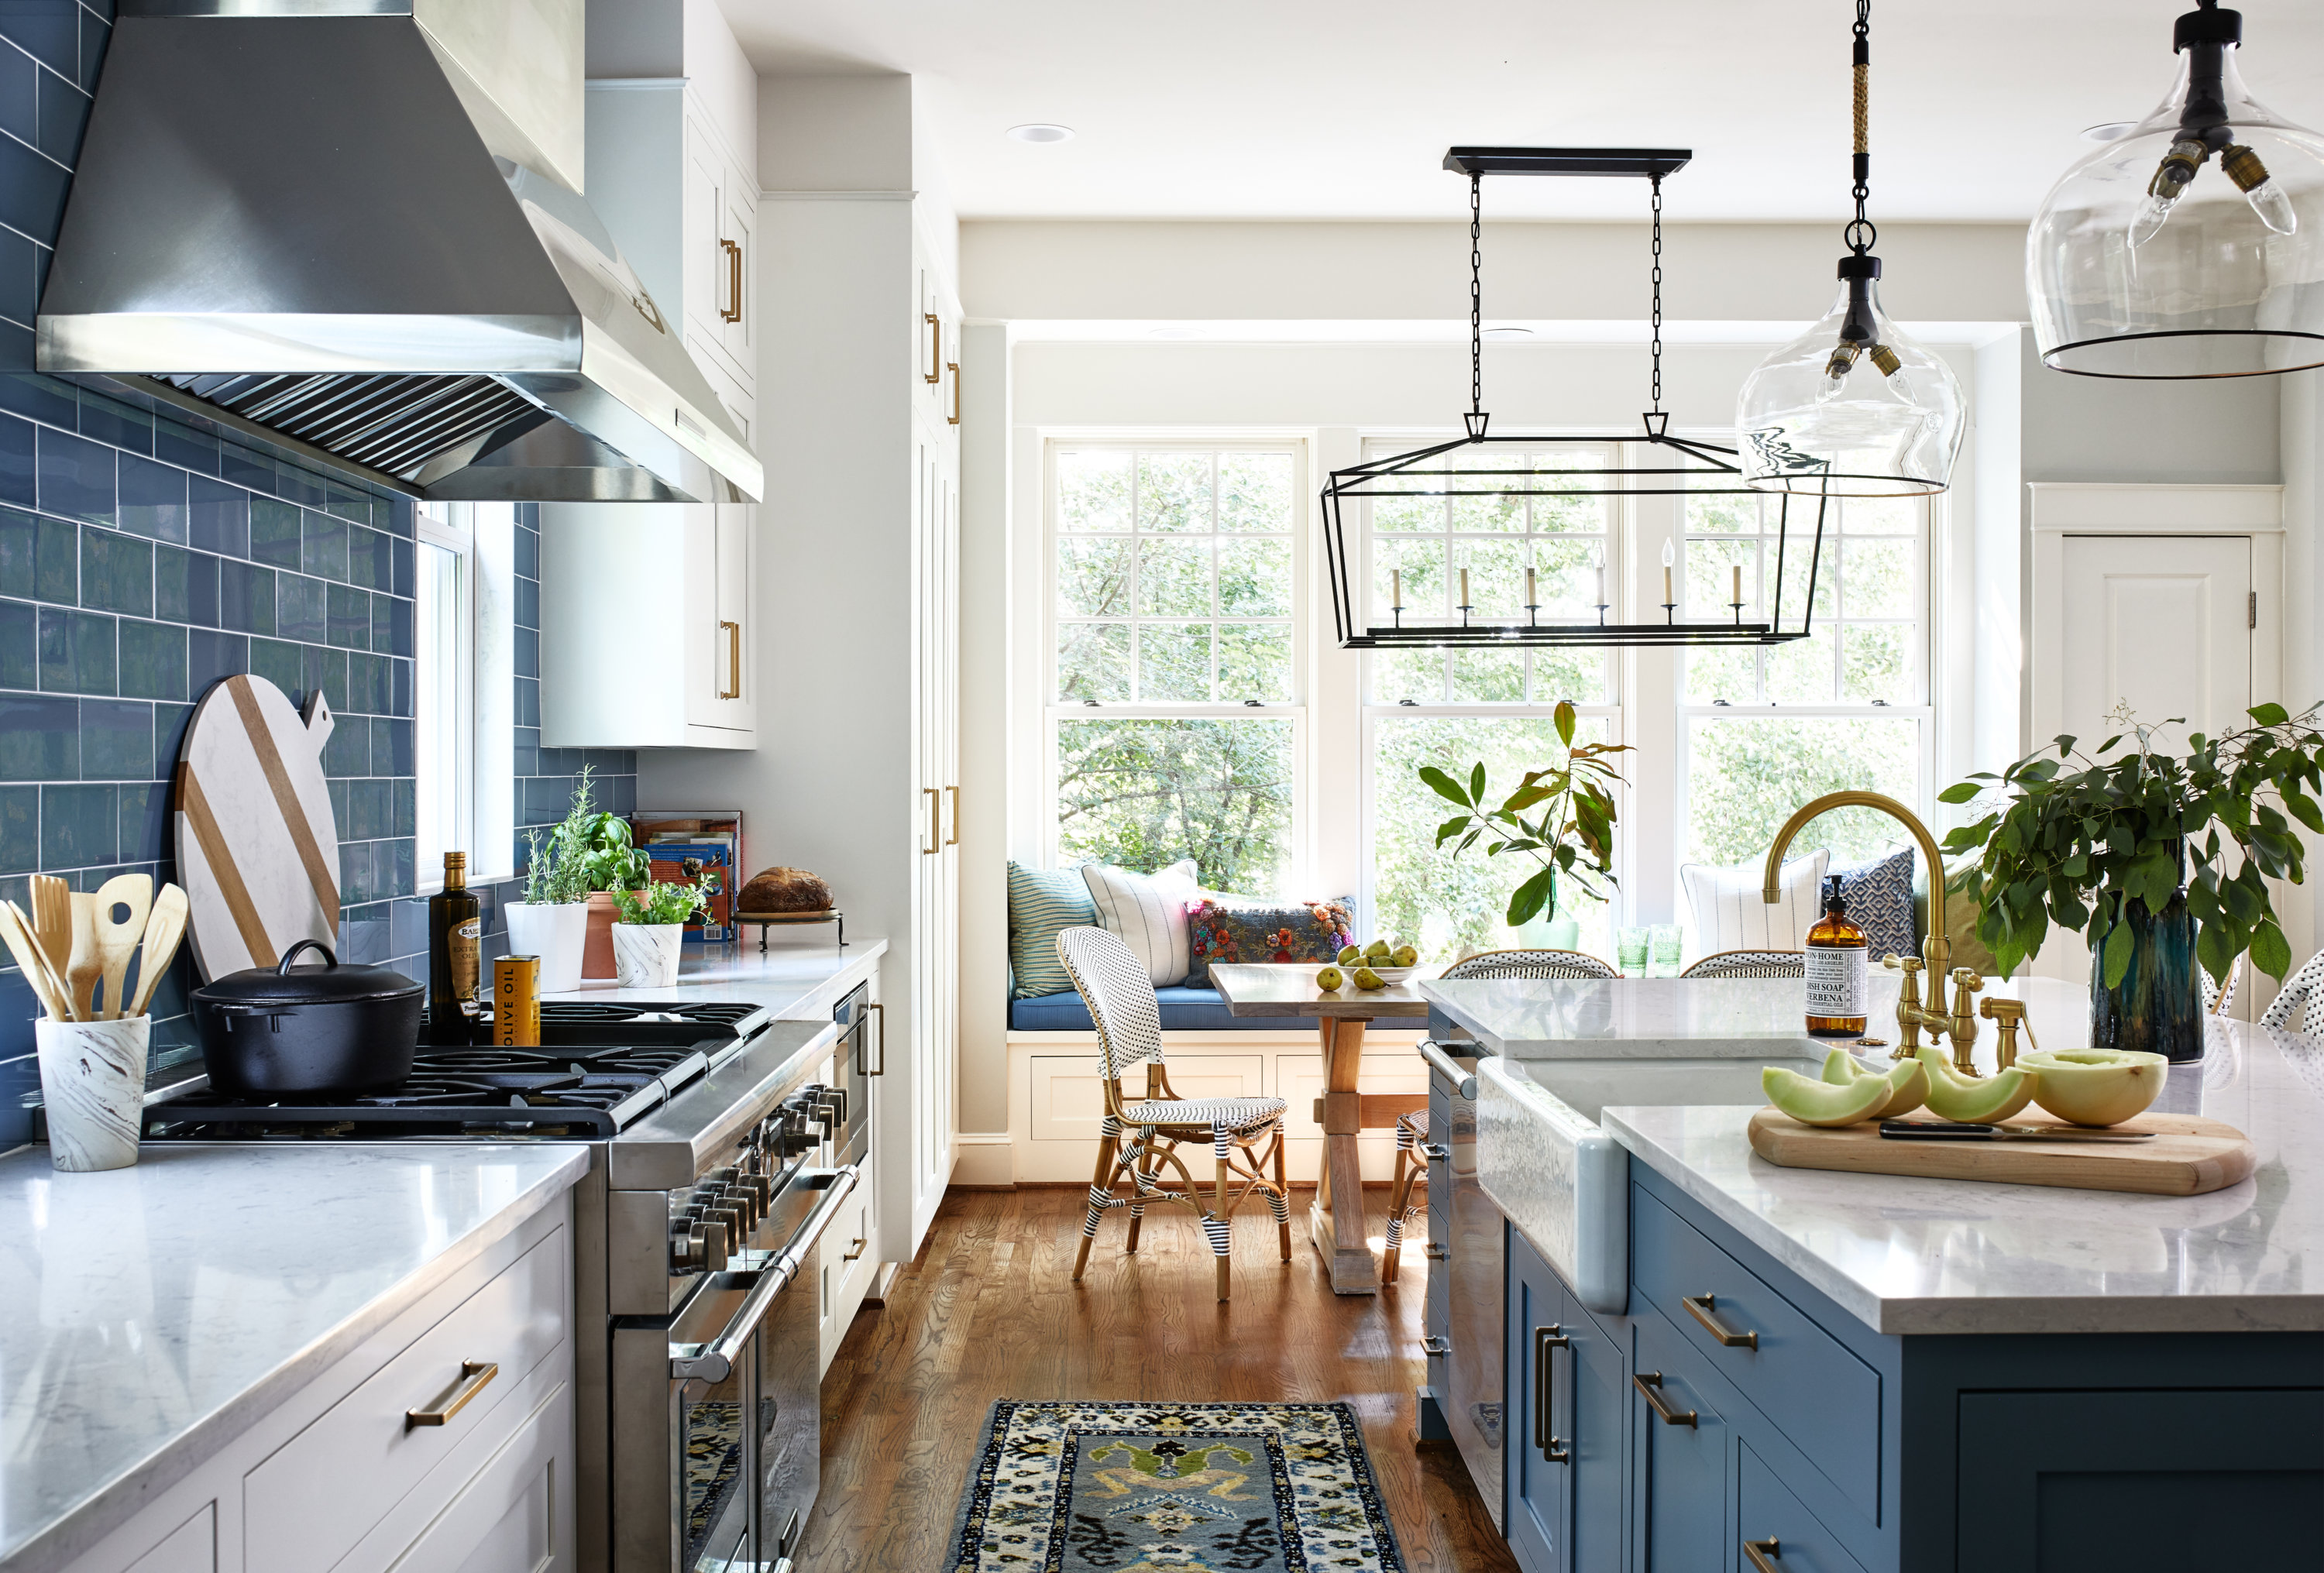 These 5 Stunning Kitchens Prove Brass Works With Every Style